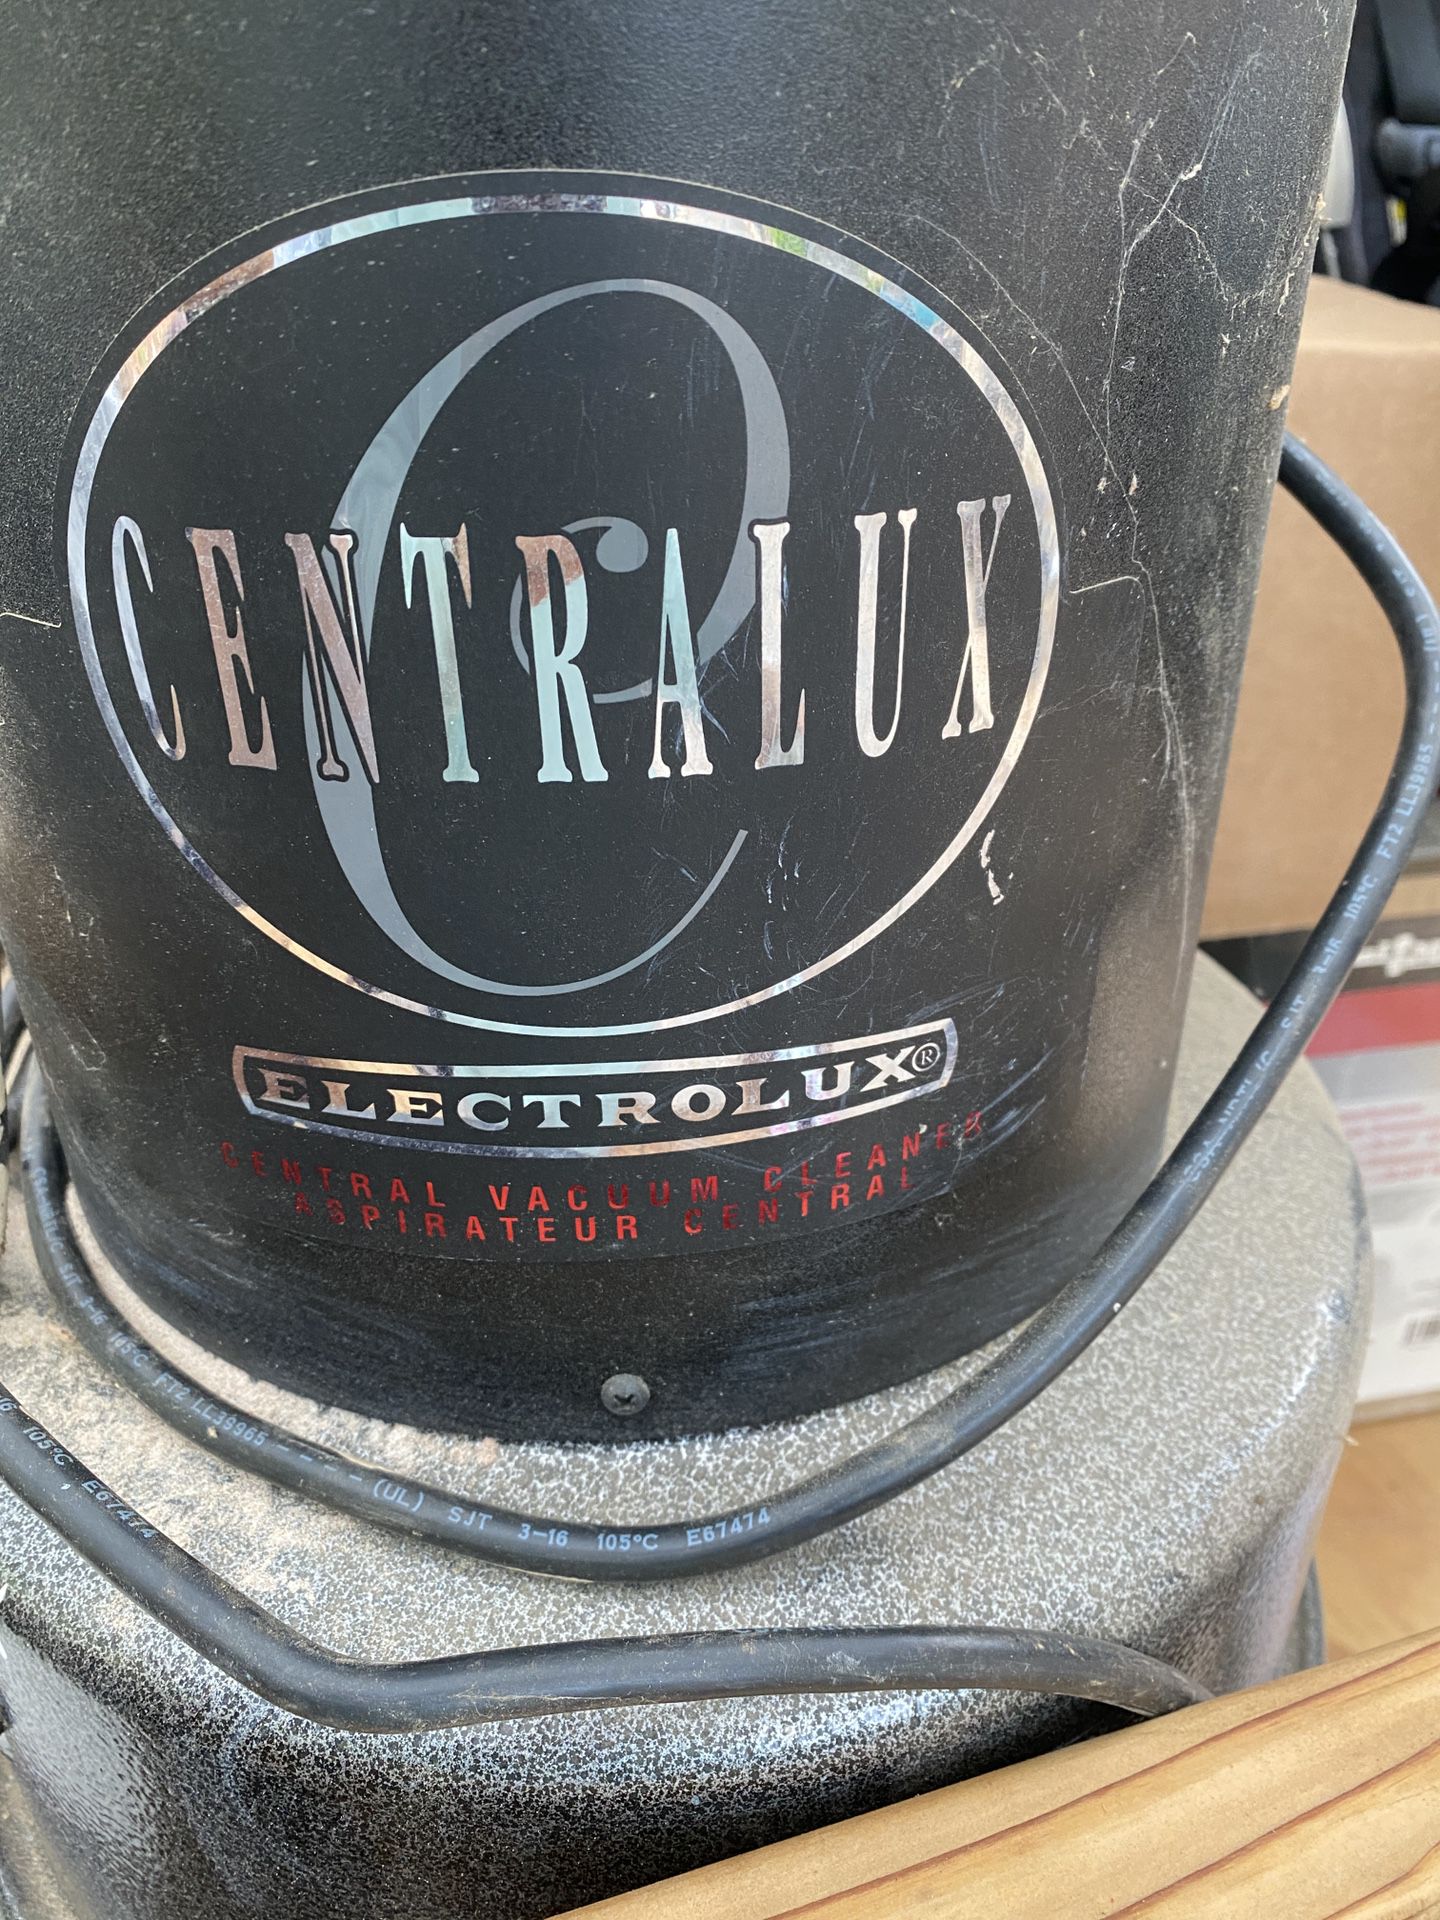 Centralux Electrolux Central Vacuum Cleaner